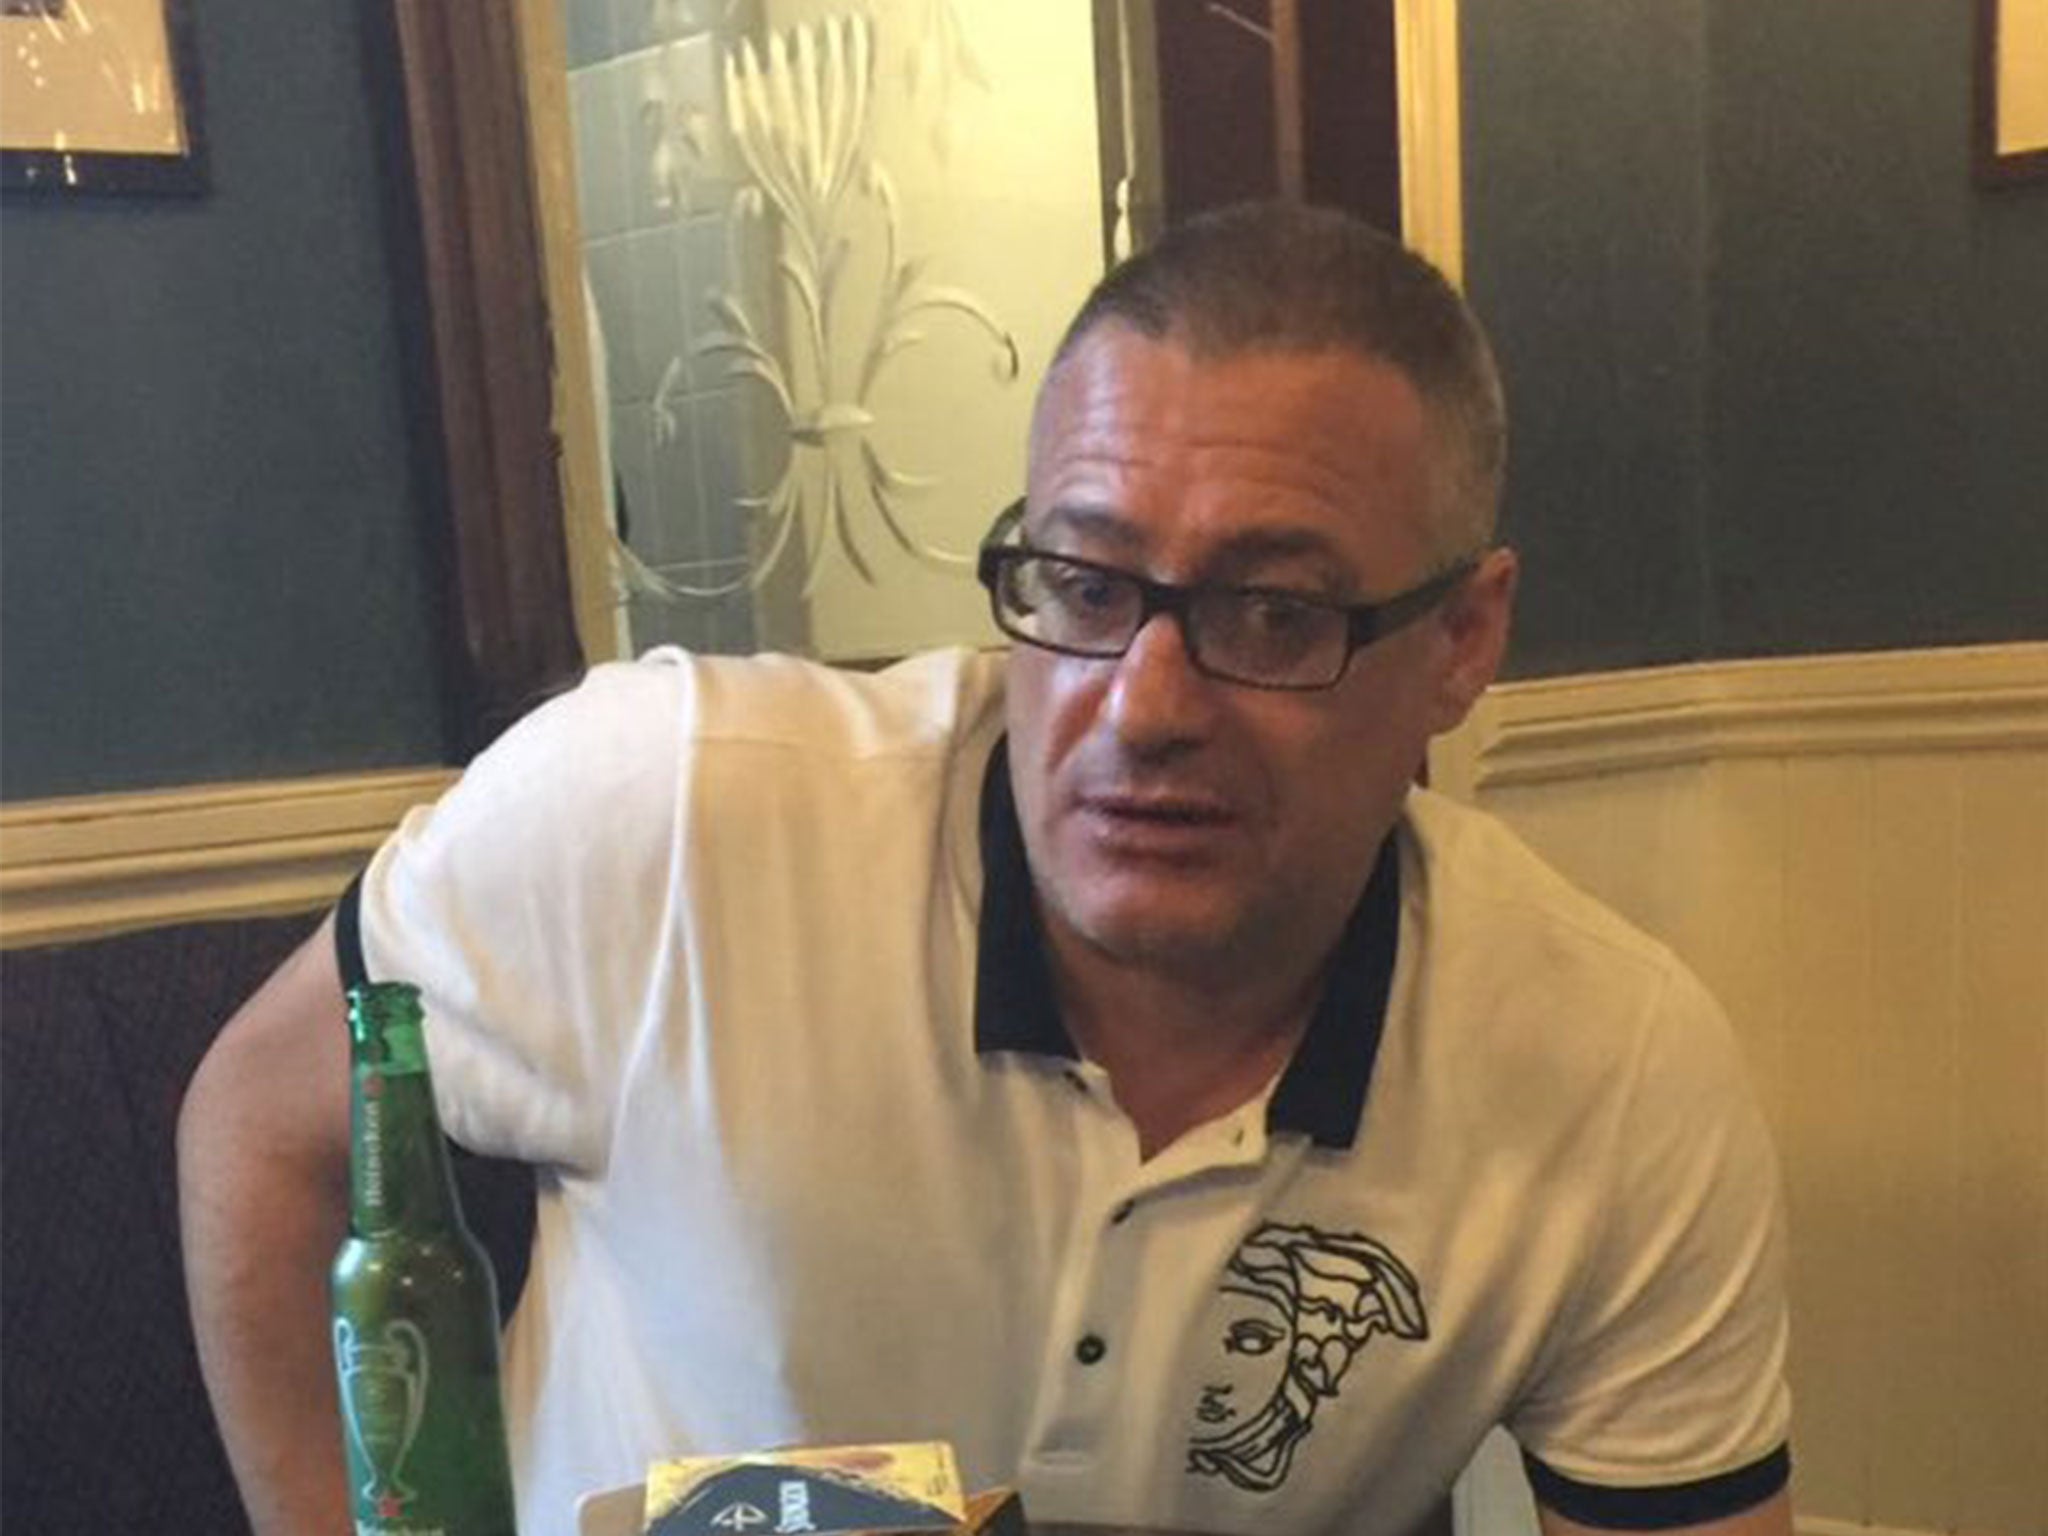 There is now a petition calling for Roy Larner to be awarded the George Cross